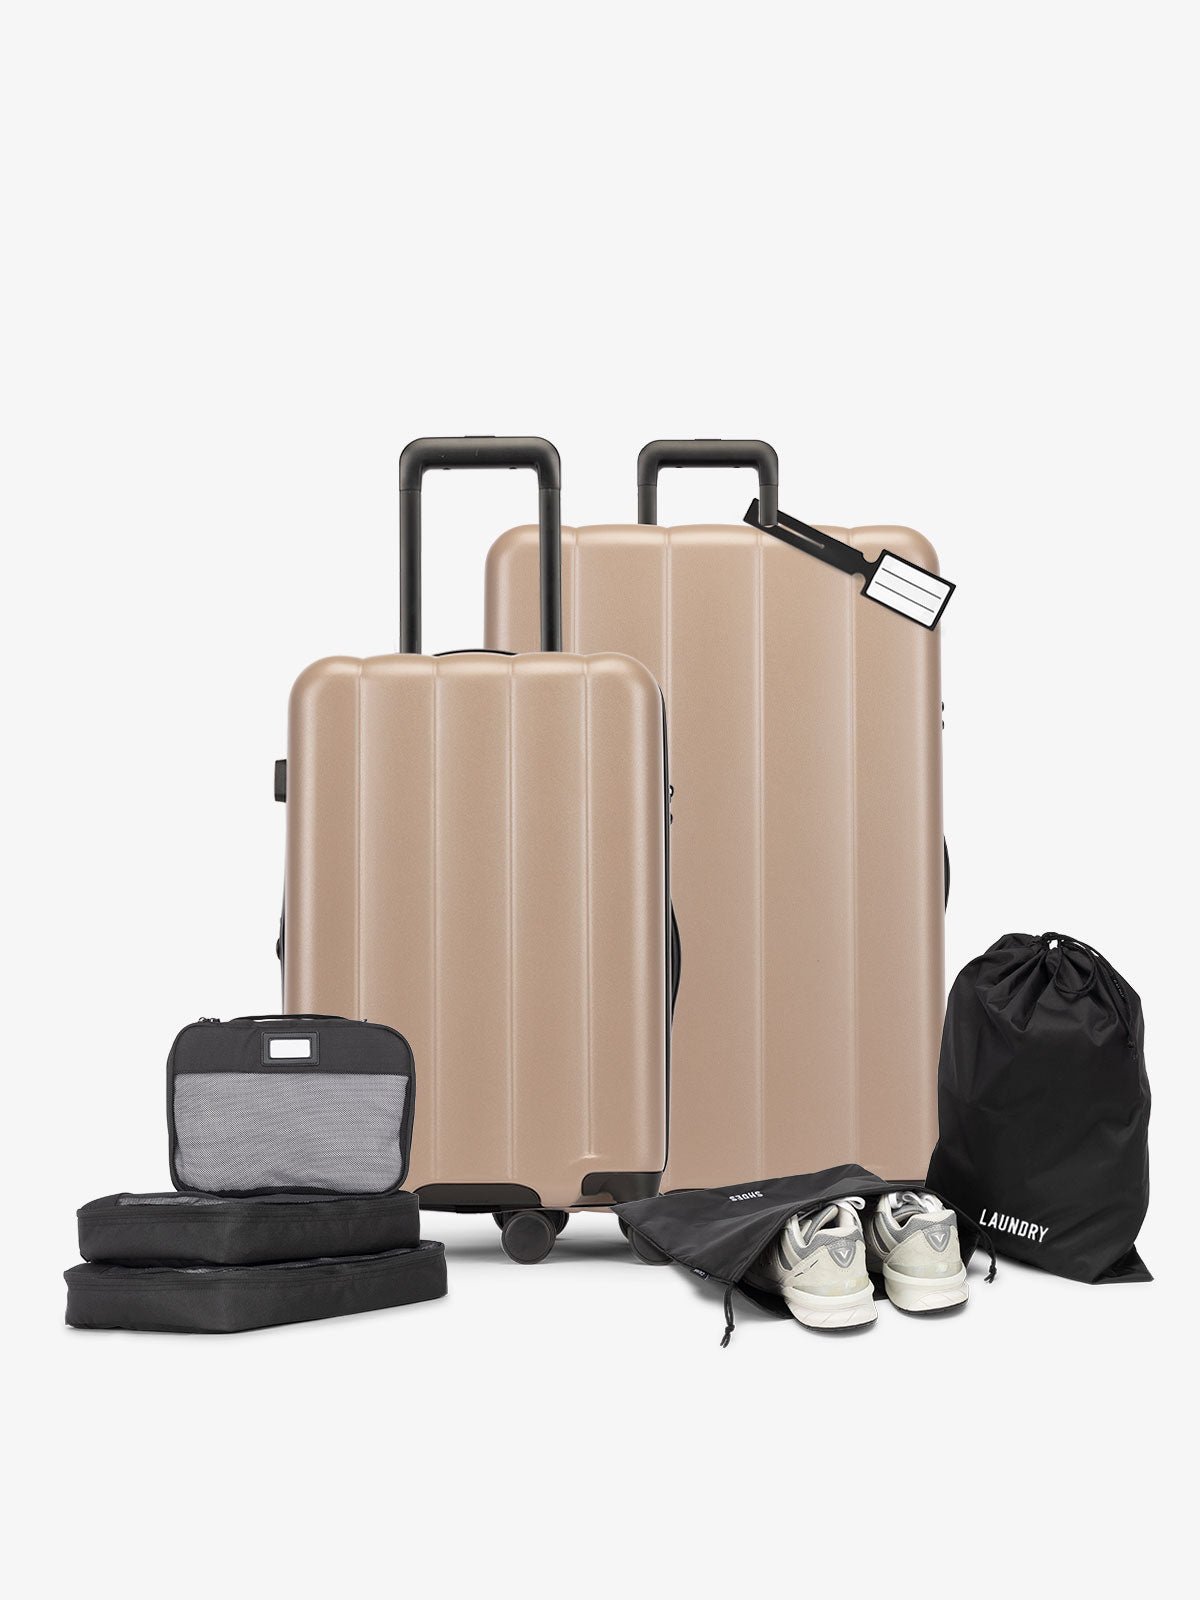 CALPAK Starter Luggage Set with Carry-On, Large Luggage, Packing Cubes, Pouches and Luggage tag in chocolate